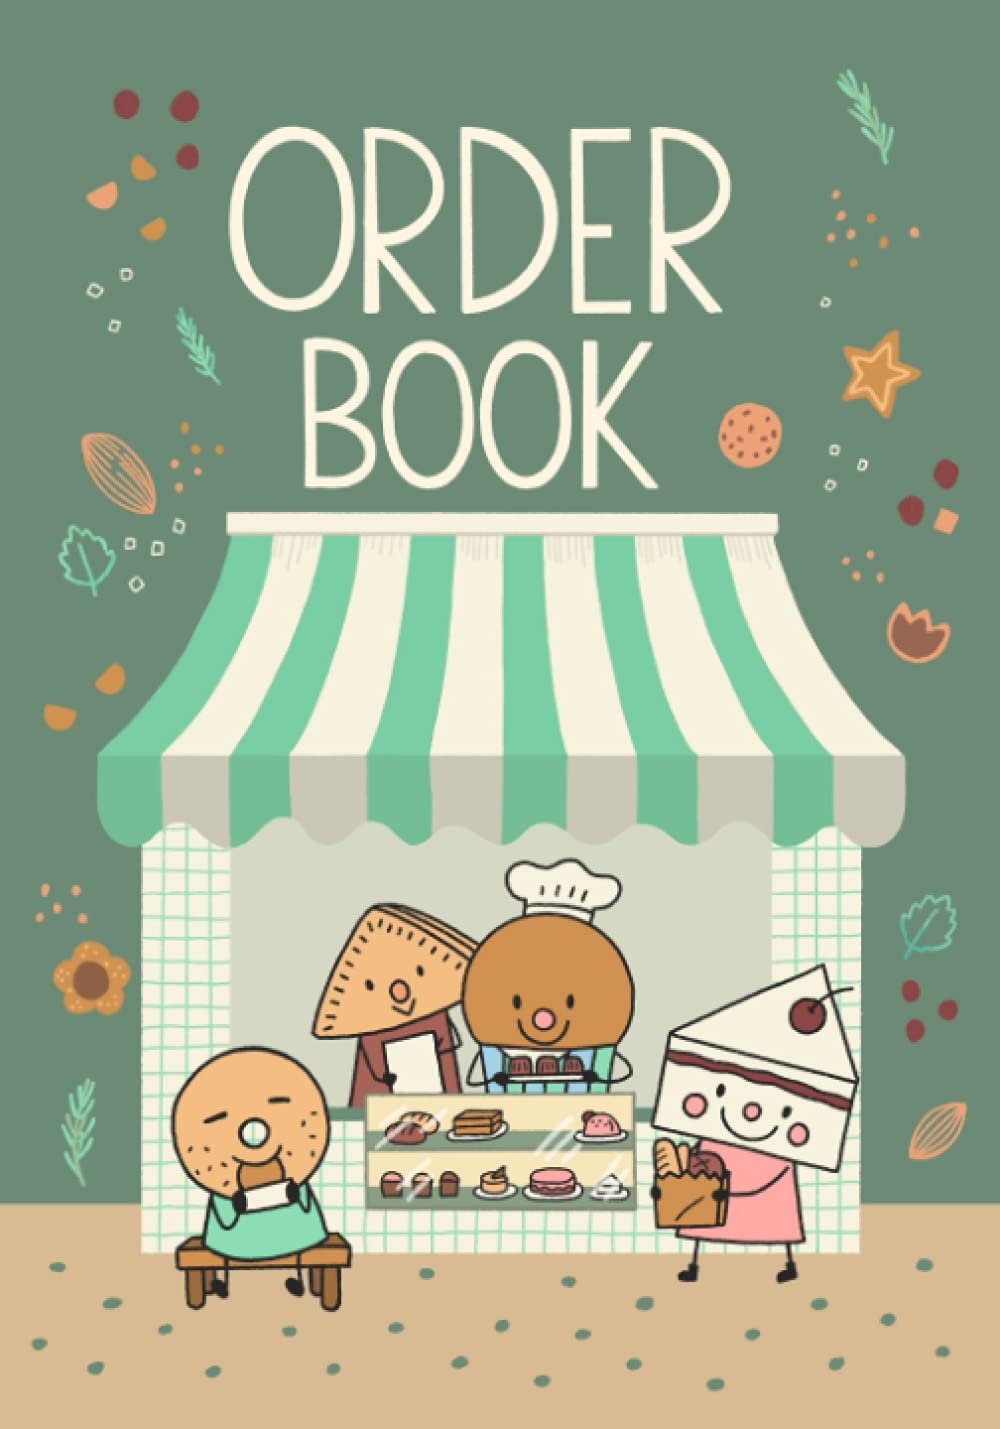 ORDER BOOK: Bakery and Cake order book, Journal&Notebook for Organizing your Orders, 7″x10″, 120 pages (Green Cover) (Bakery Notebook Journal)